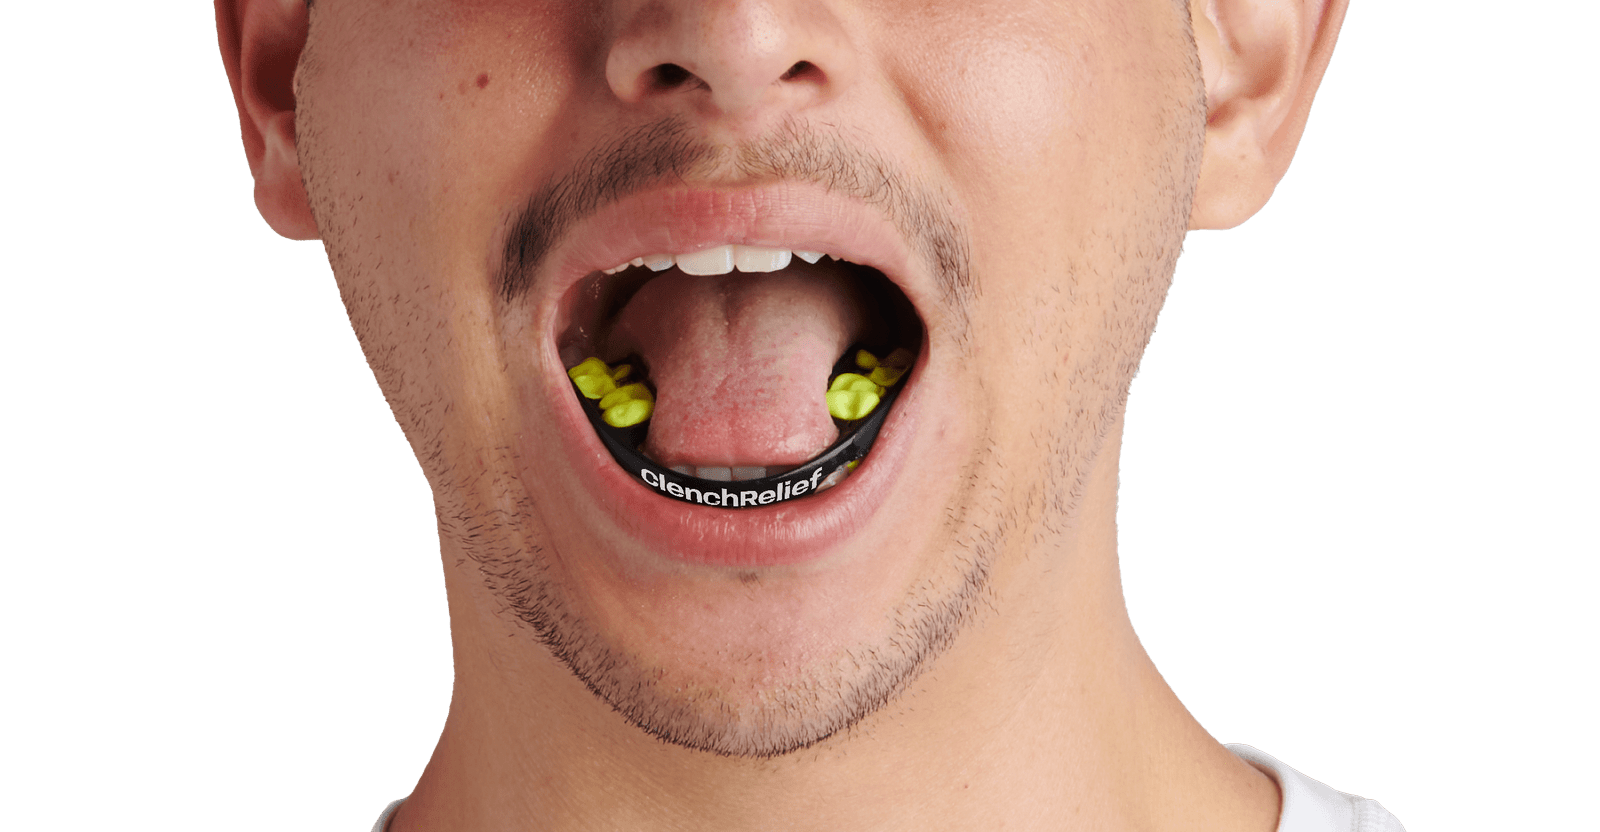 Patient wearing ClenchRelief mouthpiece